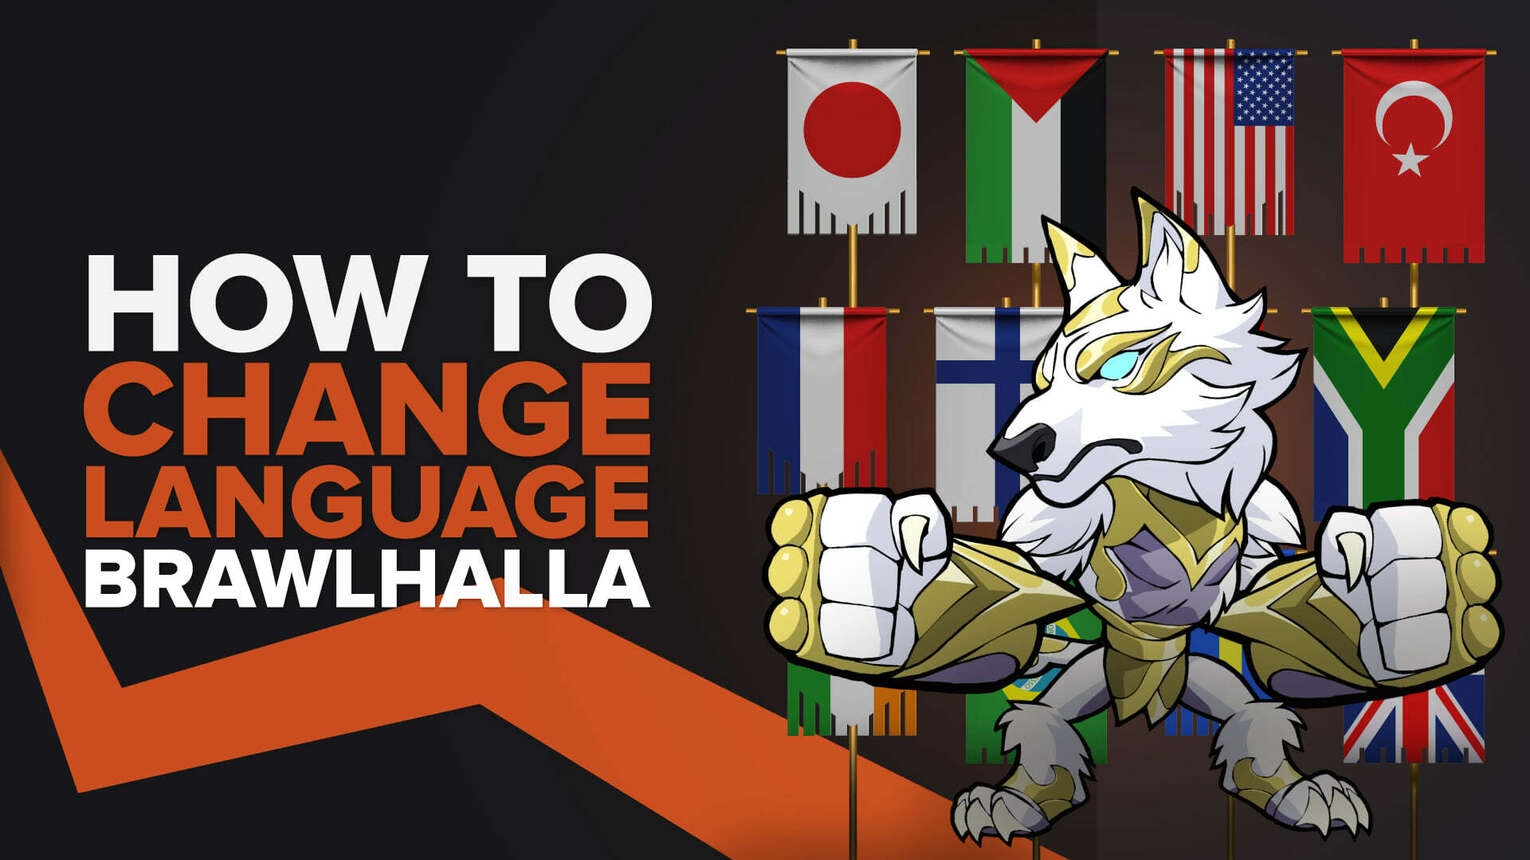 How To Quickly Change Language in Brawlhalla